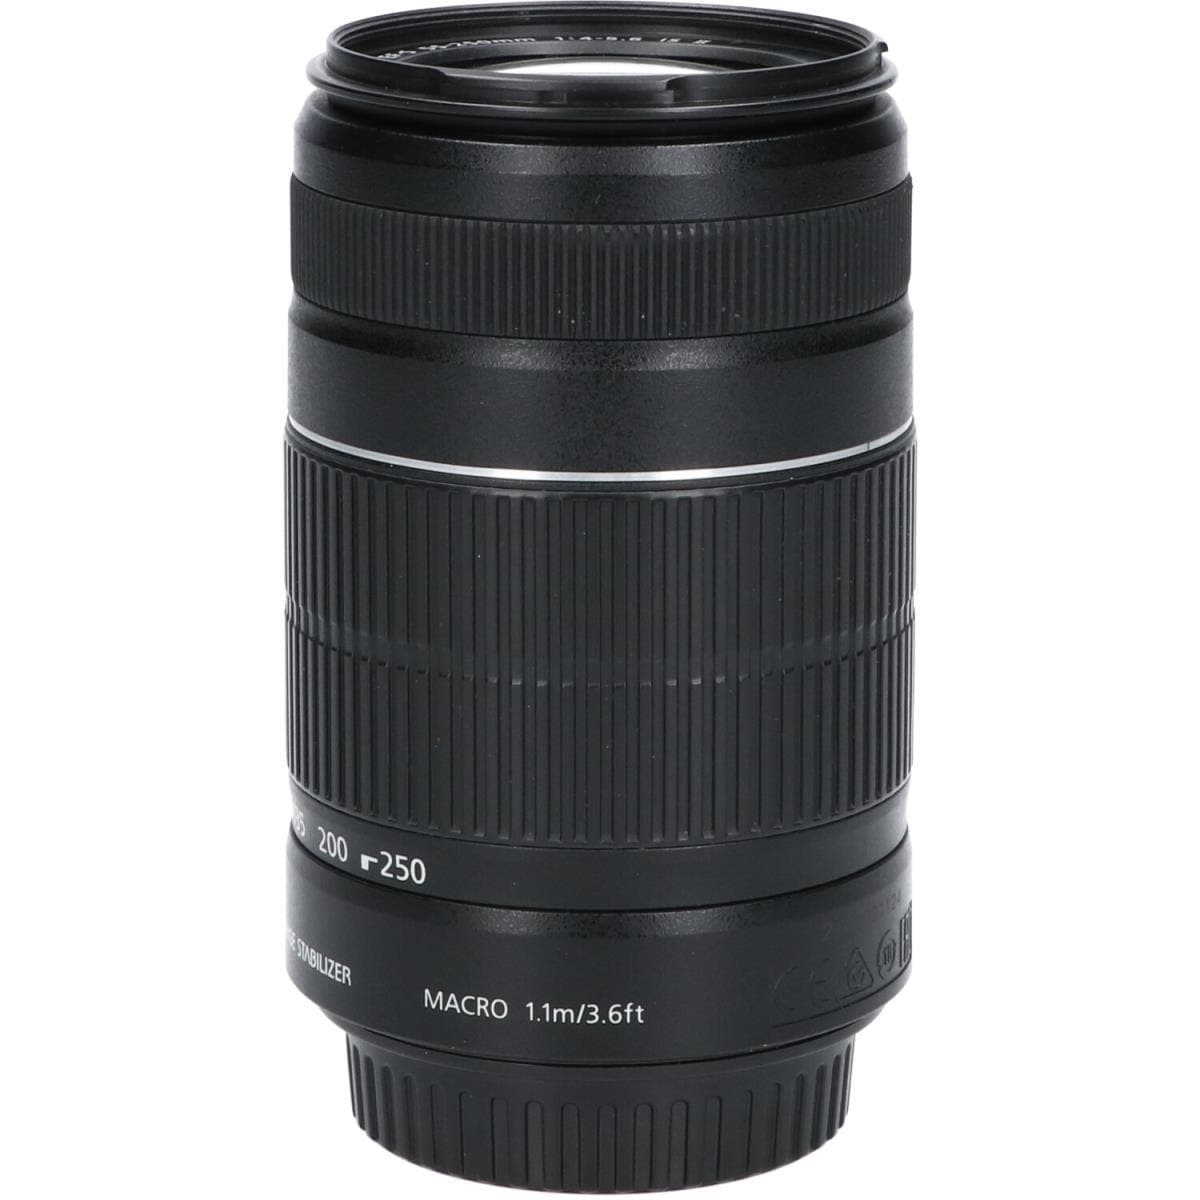 CANON EF-S55-250mm F4-5.6ISII